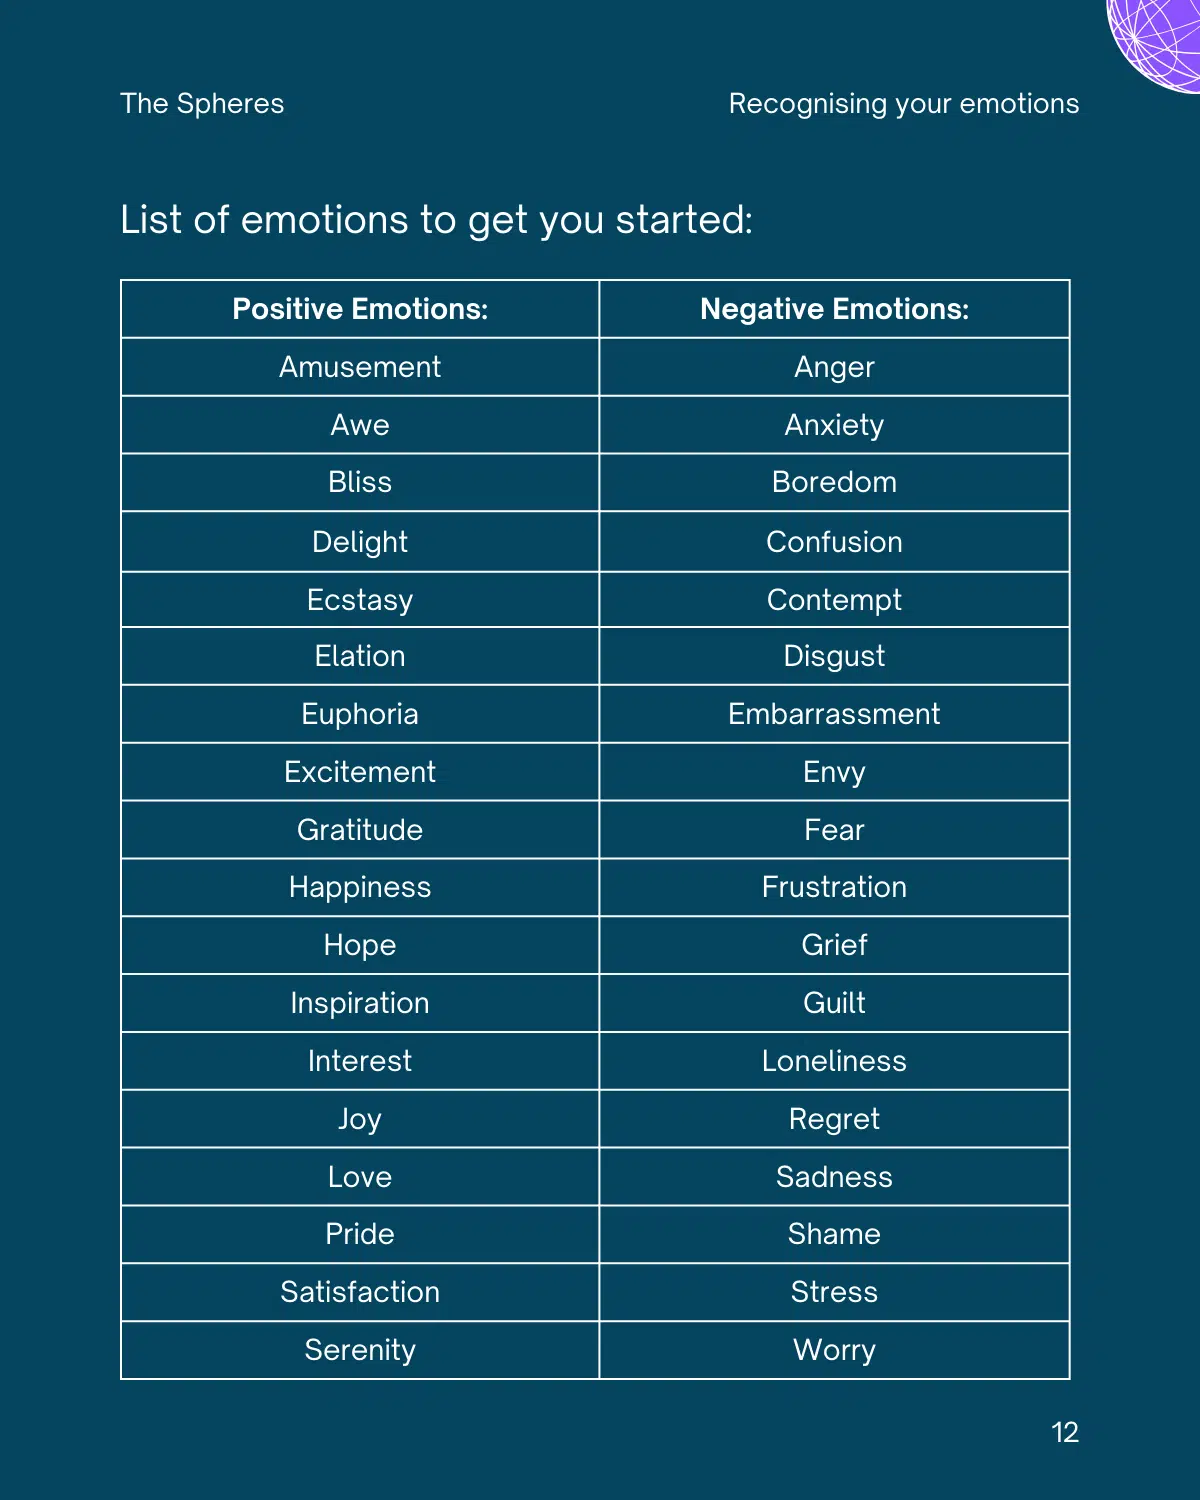 The Spheres - List of emotions